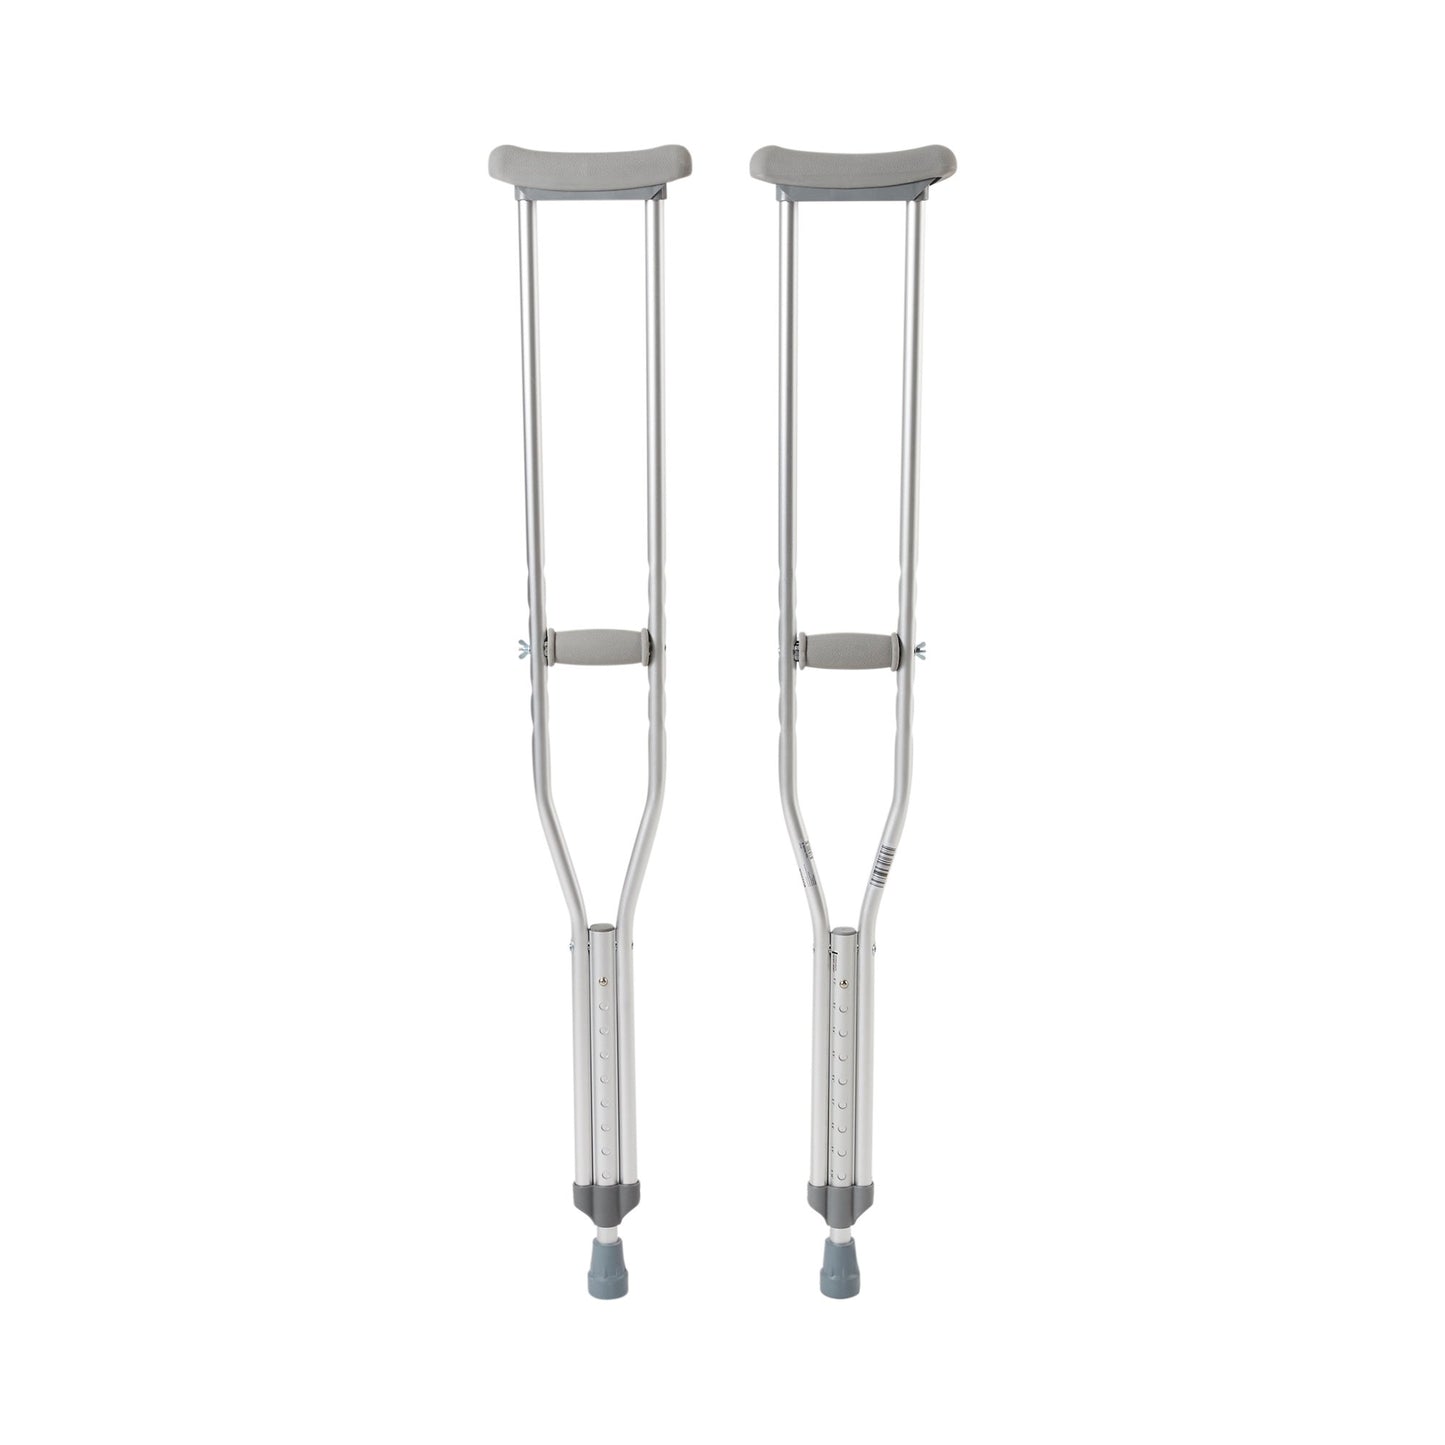 High Quality Aluminum Crutches Latex Free, Fits Adults 5'2"-5'10" Fast Shipping!